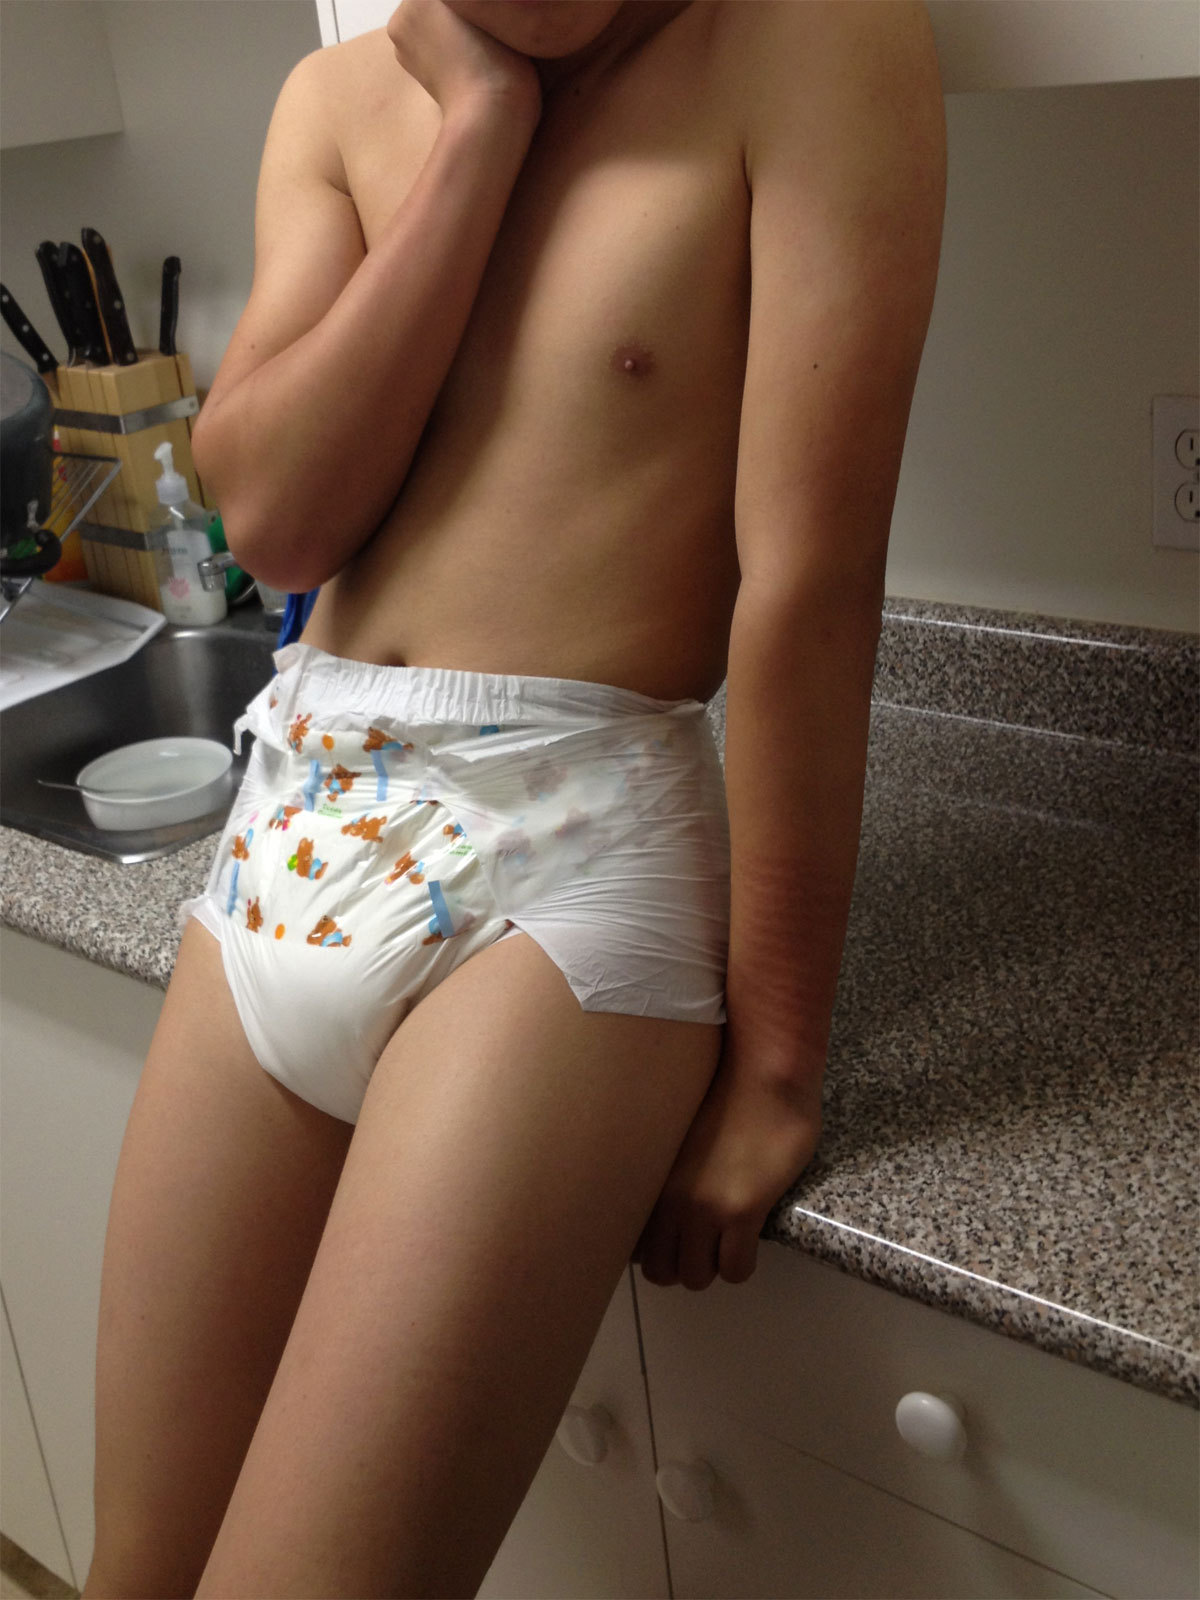 Forced to wear diaper punishment